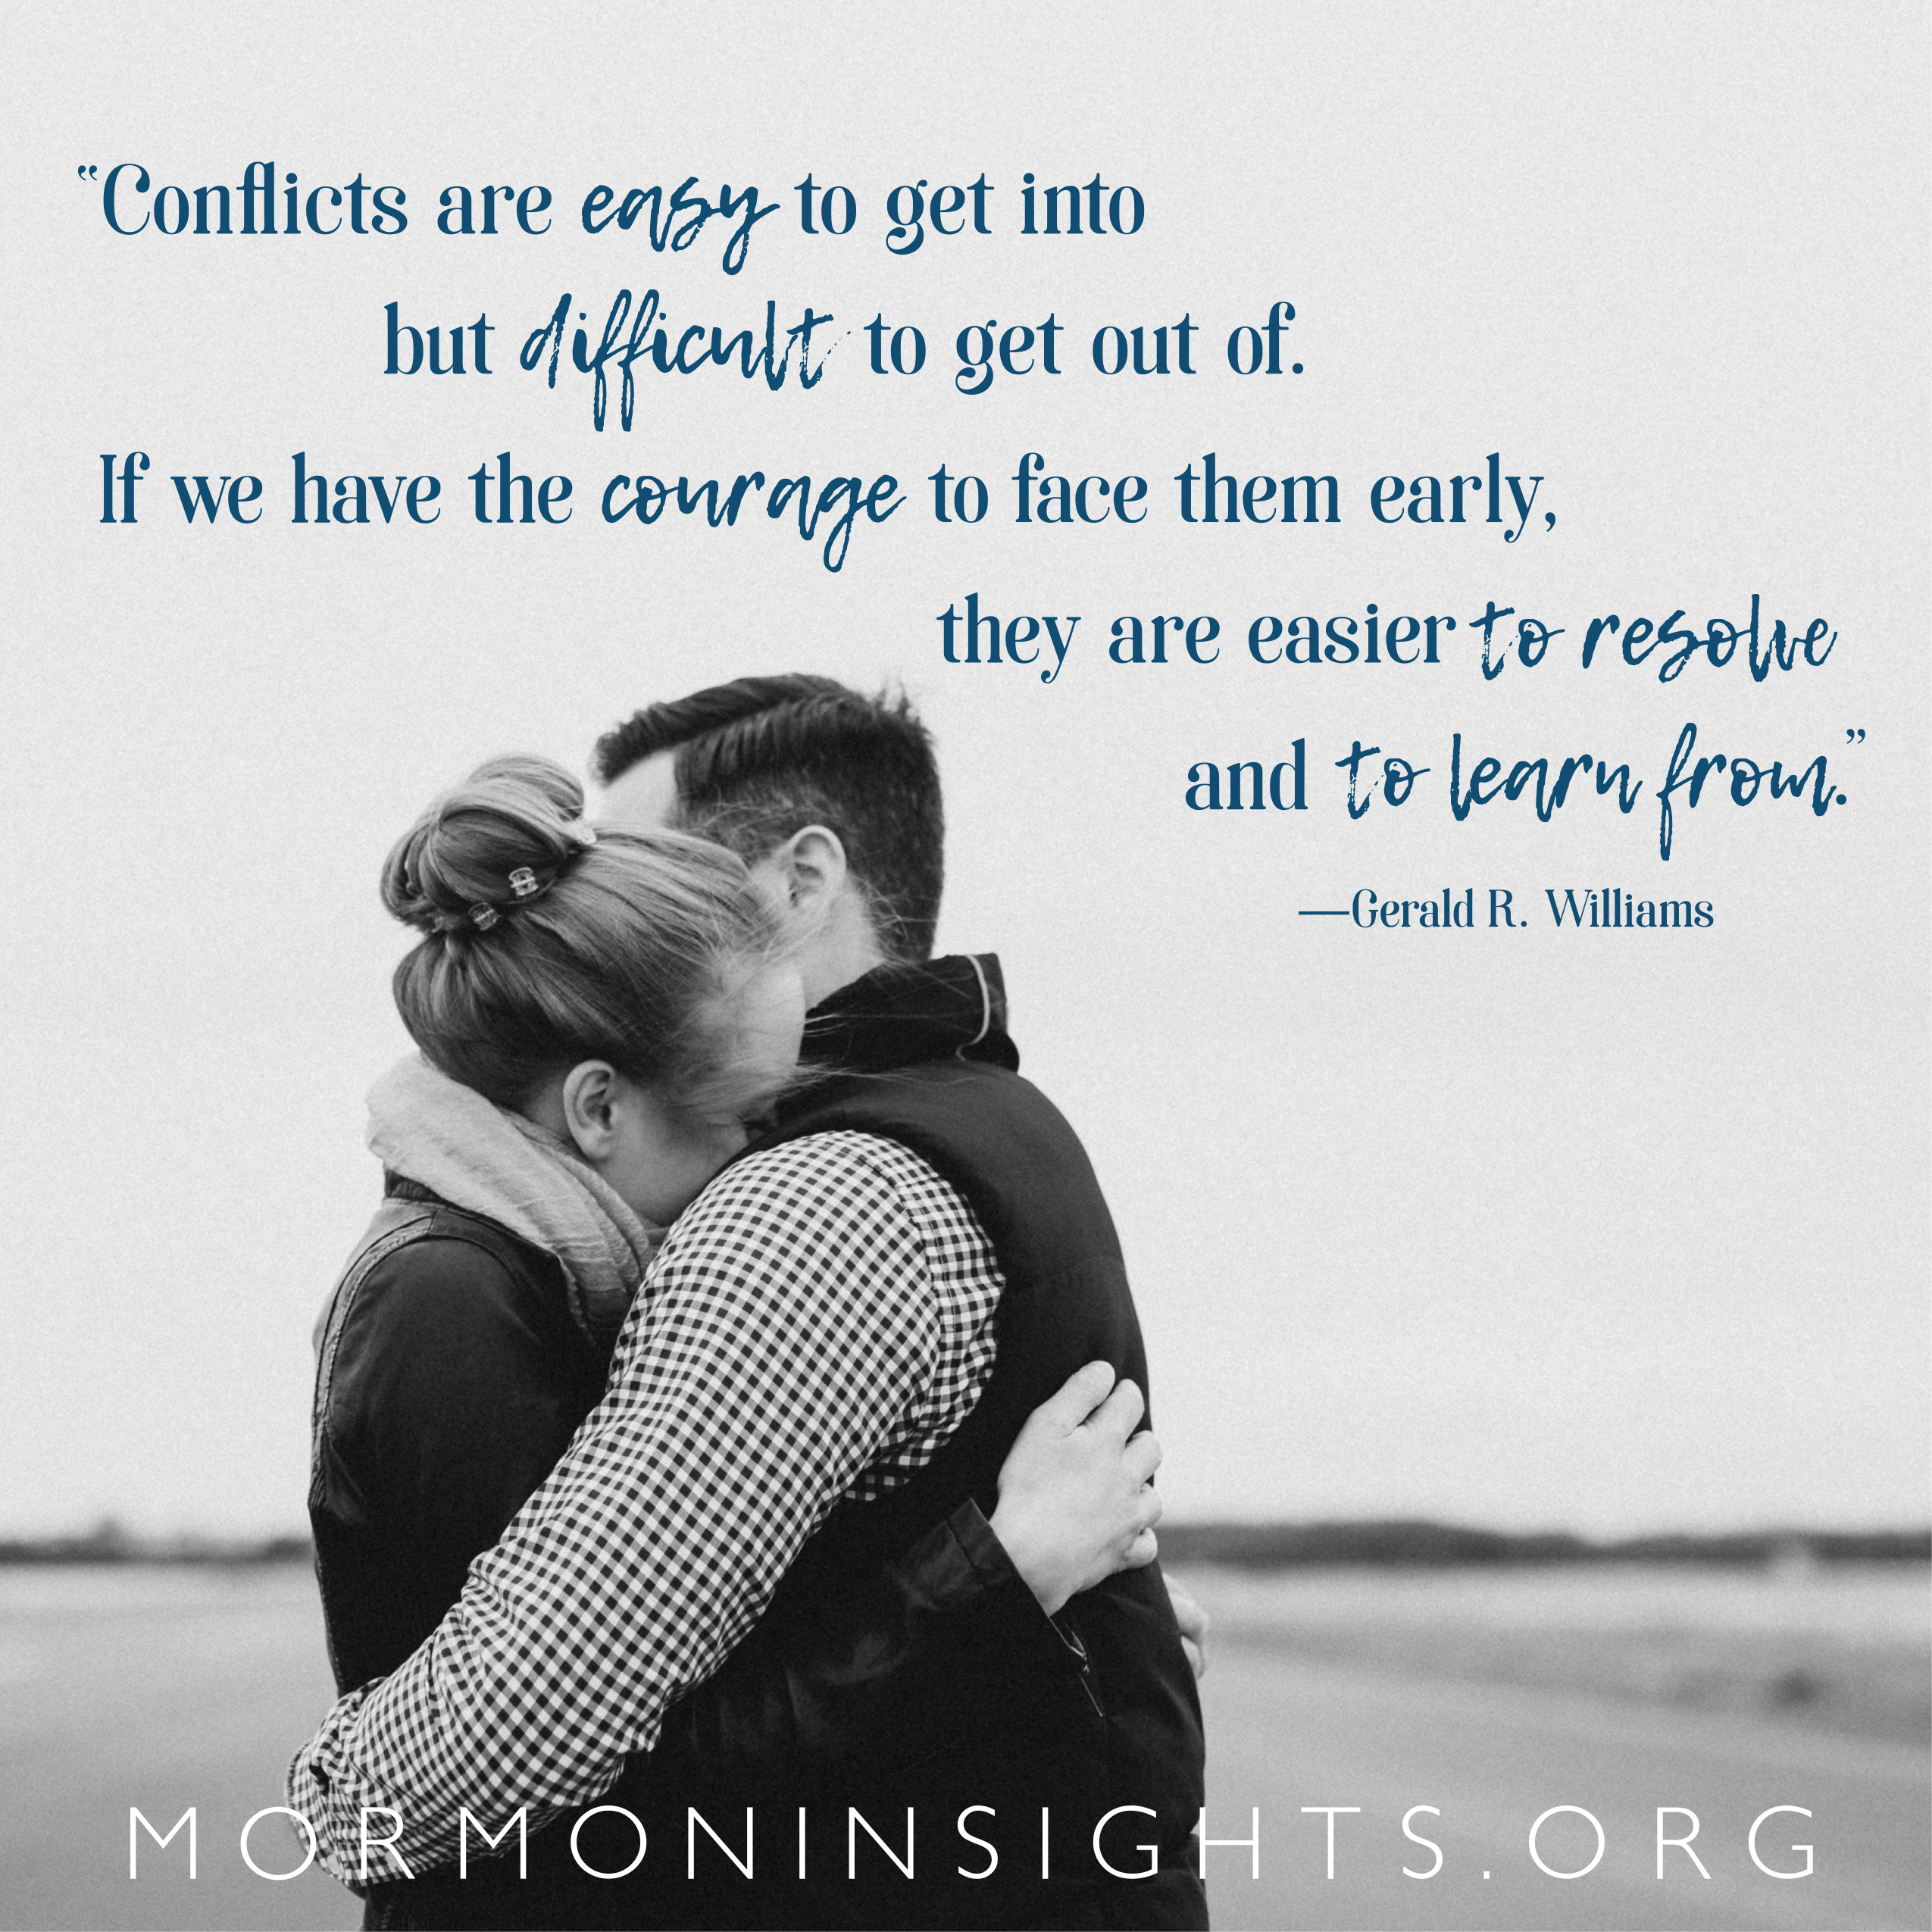 "Conflicts are easy to get into but difficult to get out of. If we have the courage to face them early, they are easier to resolve and to learn from." -Gerald R. Williams. Couple hugging